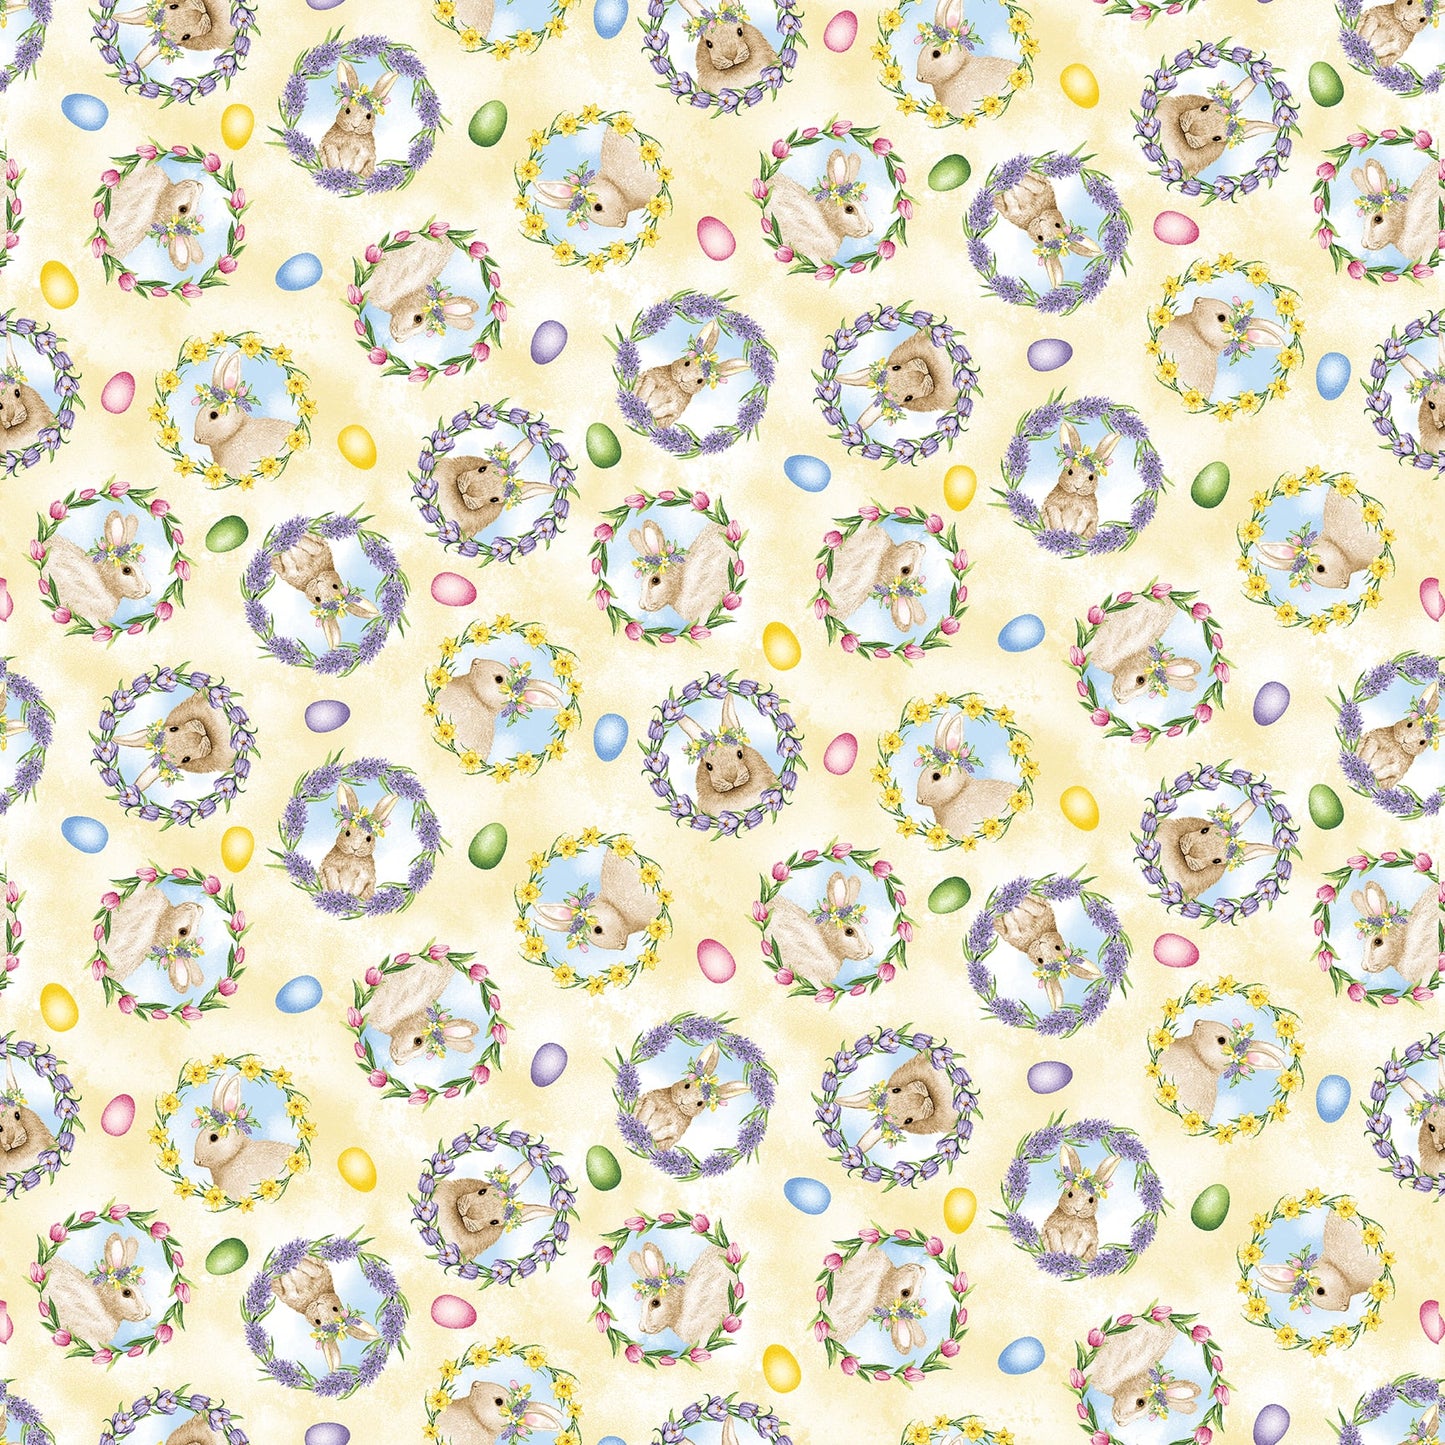 Hoppy Hunting Bunny Medals Fabric - By the yard